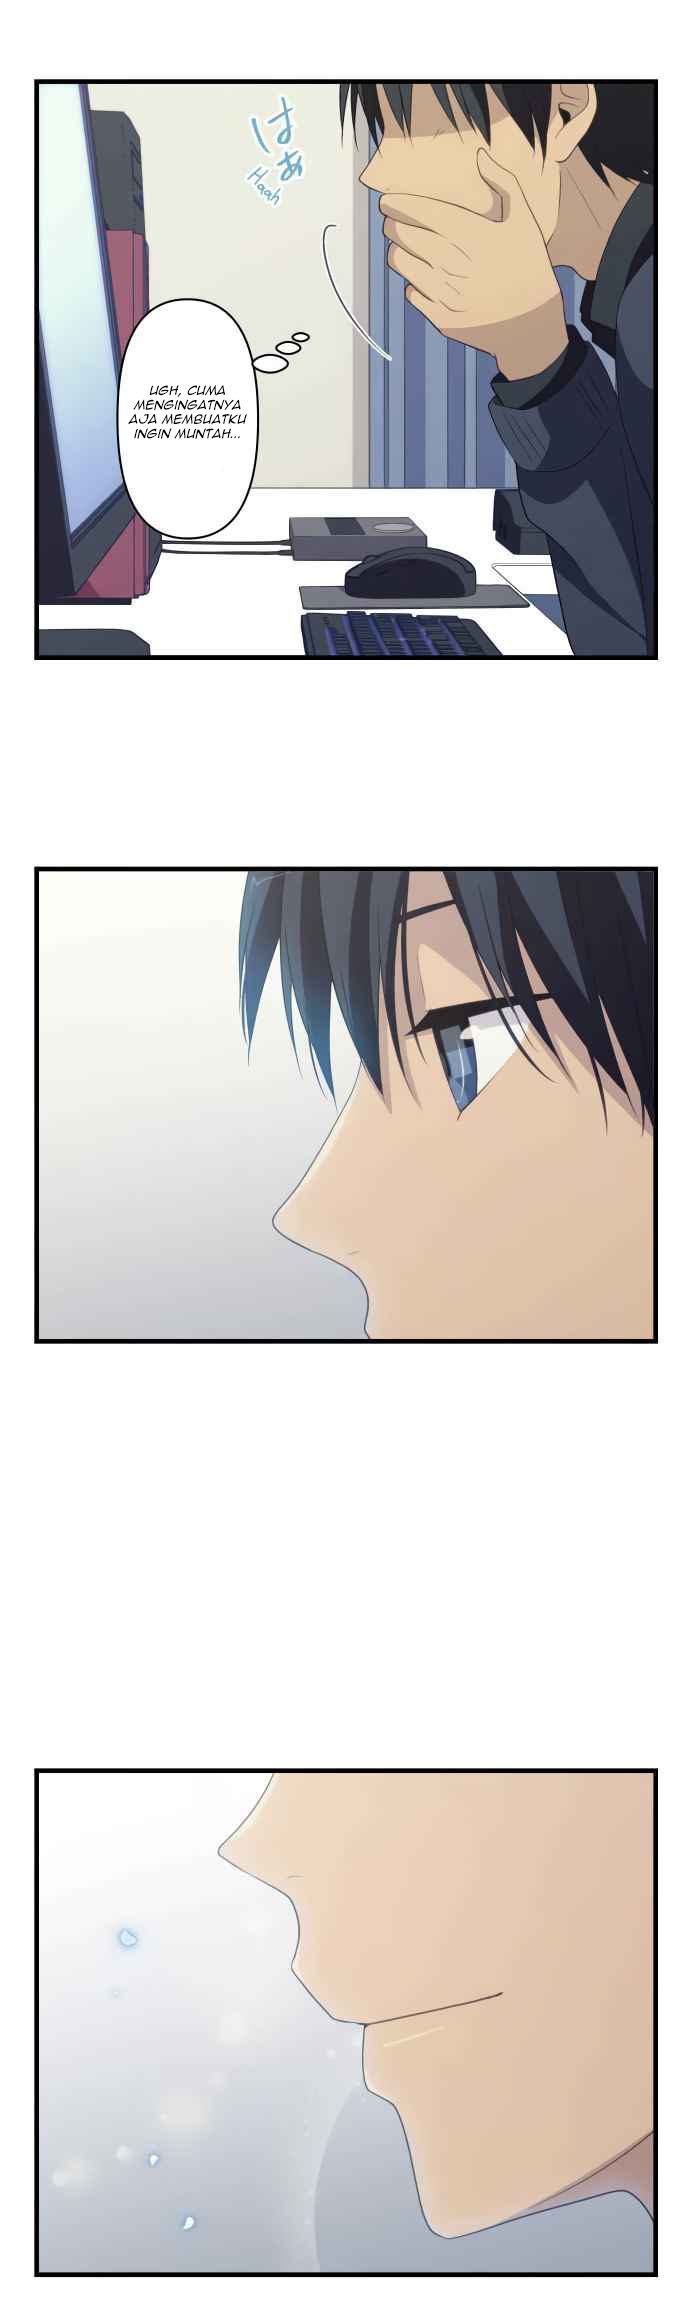 Blue Hearts Chapter 50